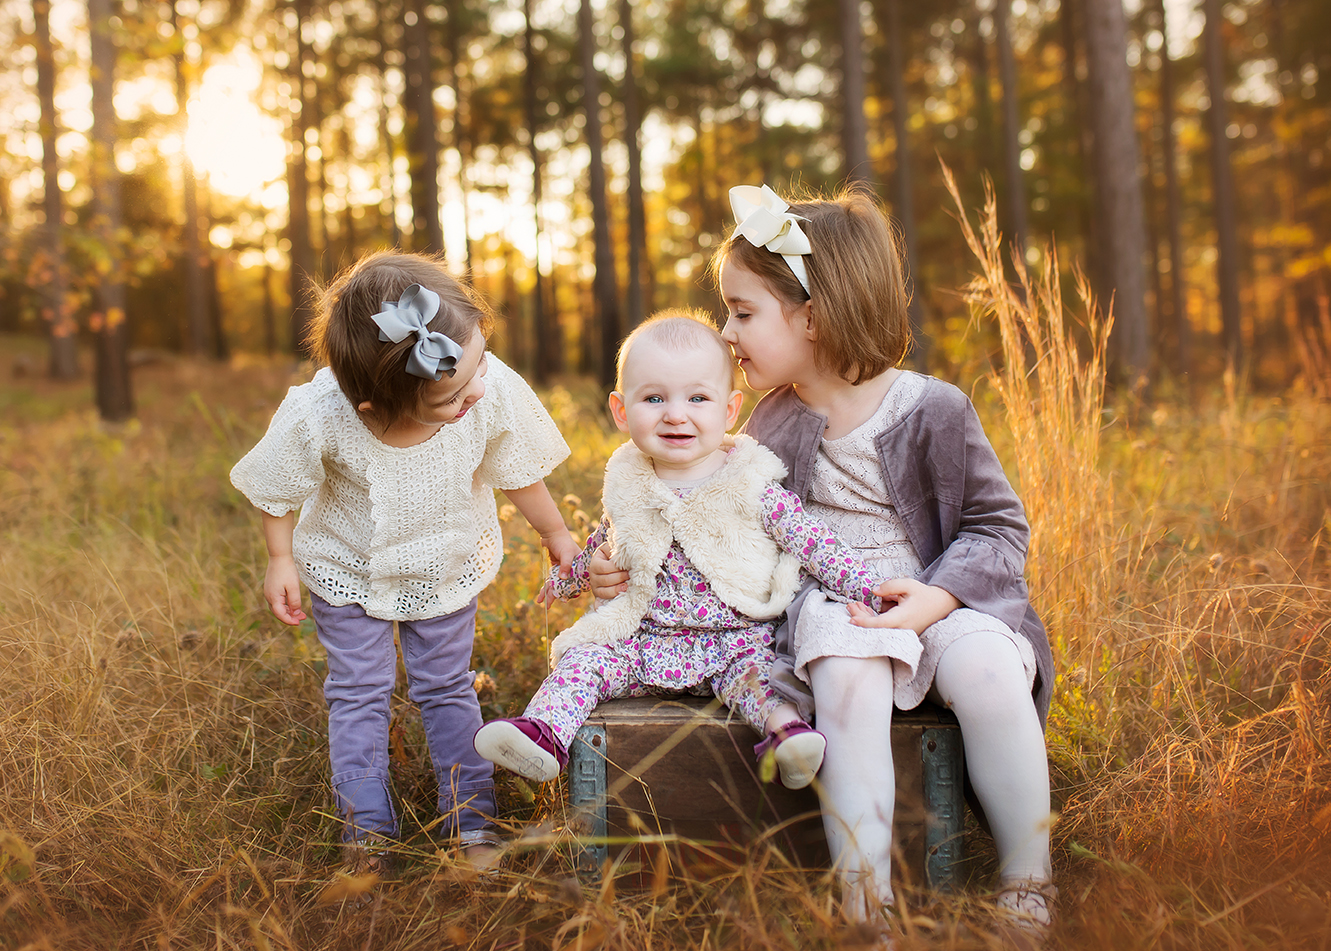 3 tips for successful family photos